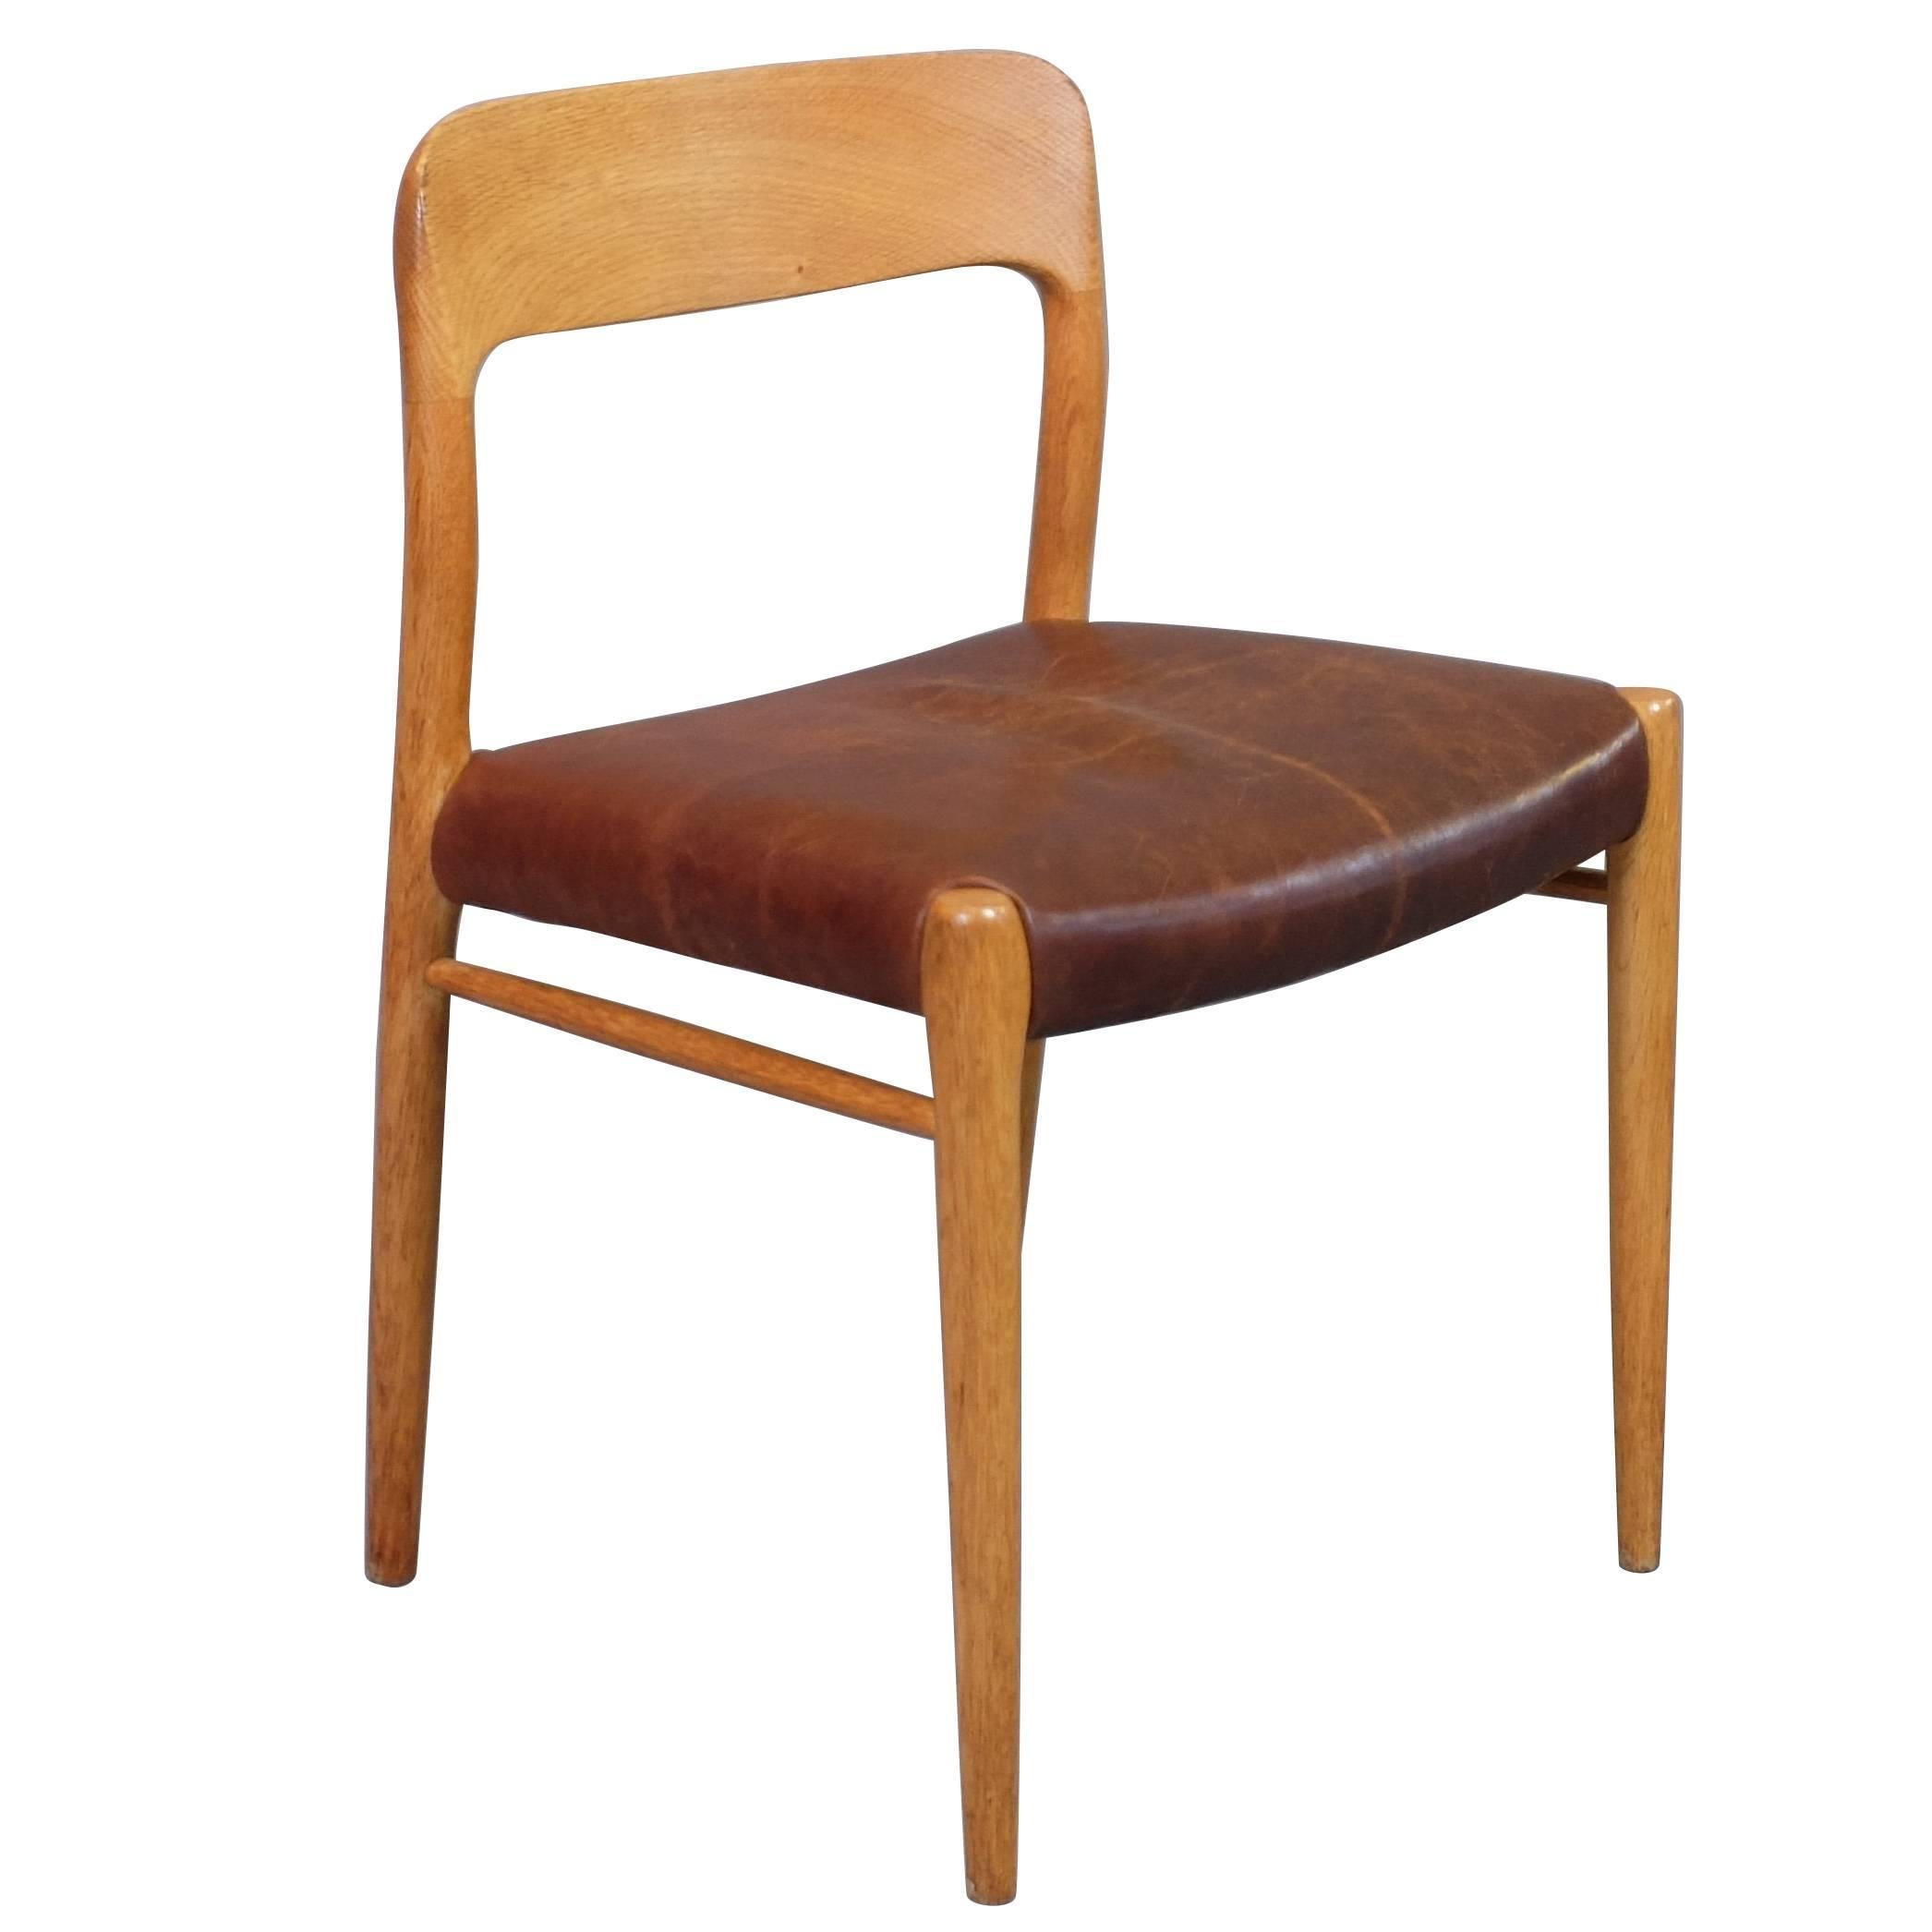 Moller 75 Chairs - 15 For Sale on 1stDibs | moller 75 chairs for 